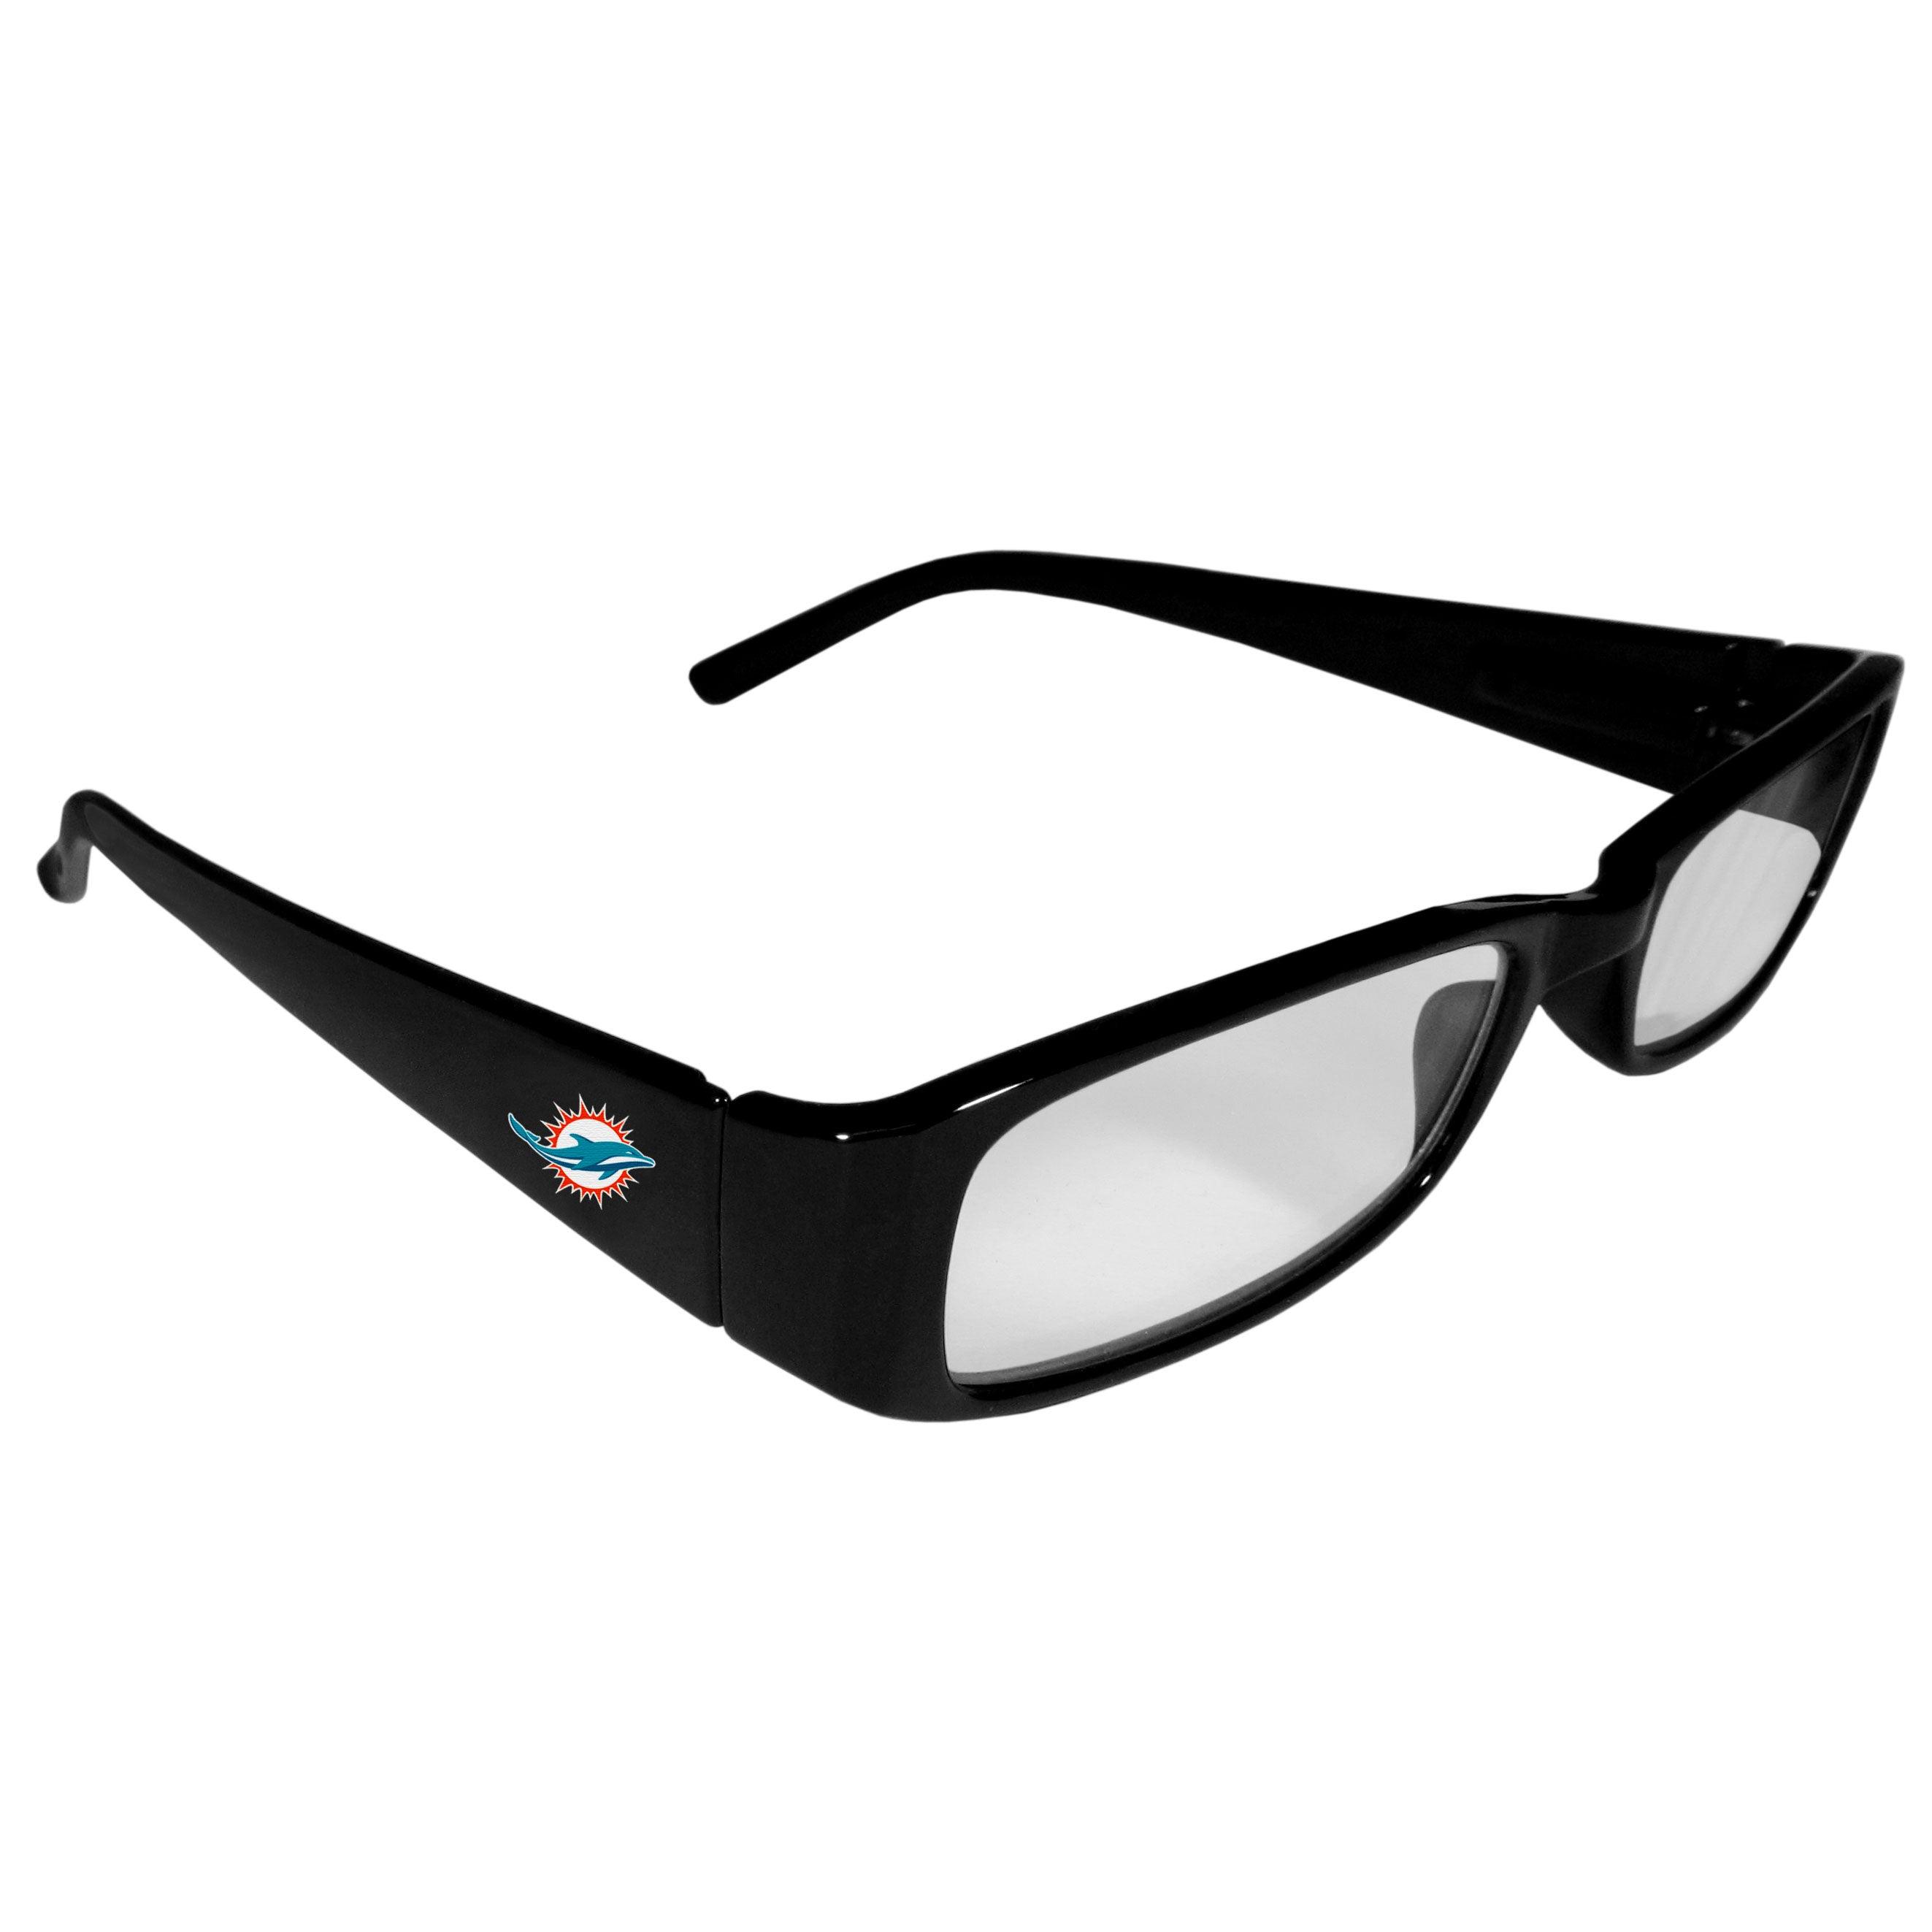 Miami Dolphins Printed Reading Glasses, +2.25 - Flyclothing LLC